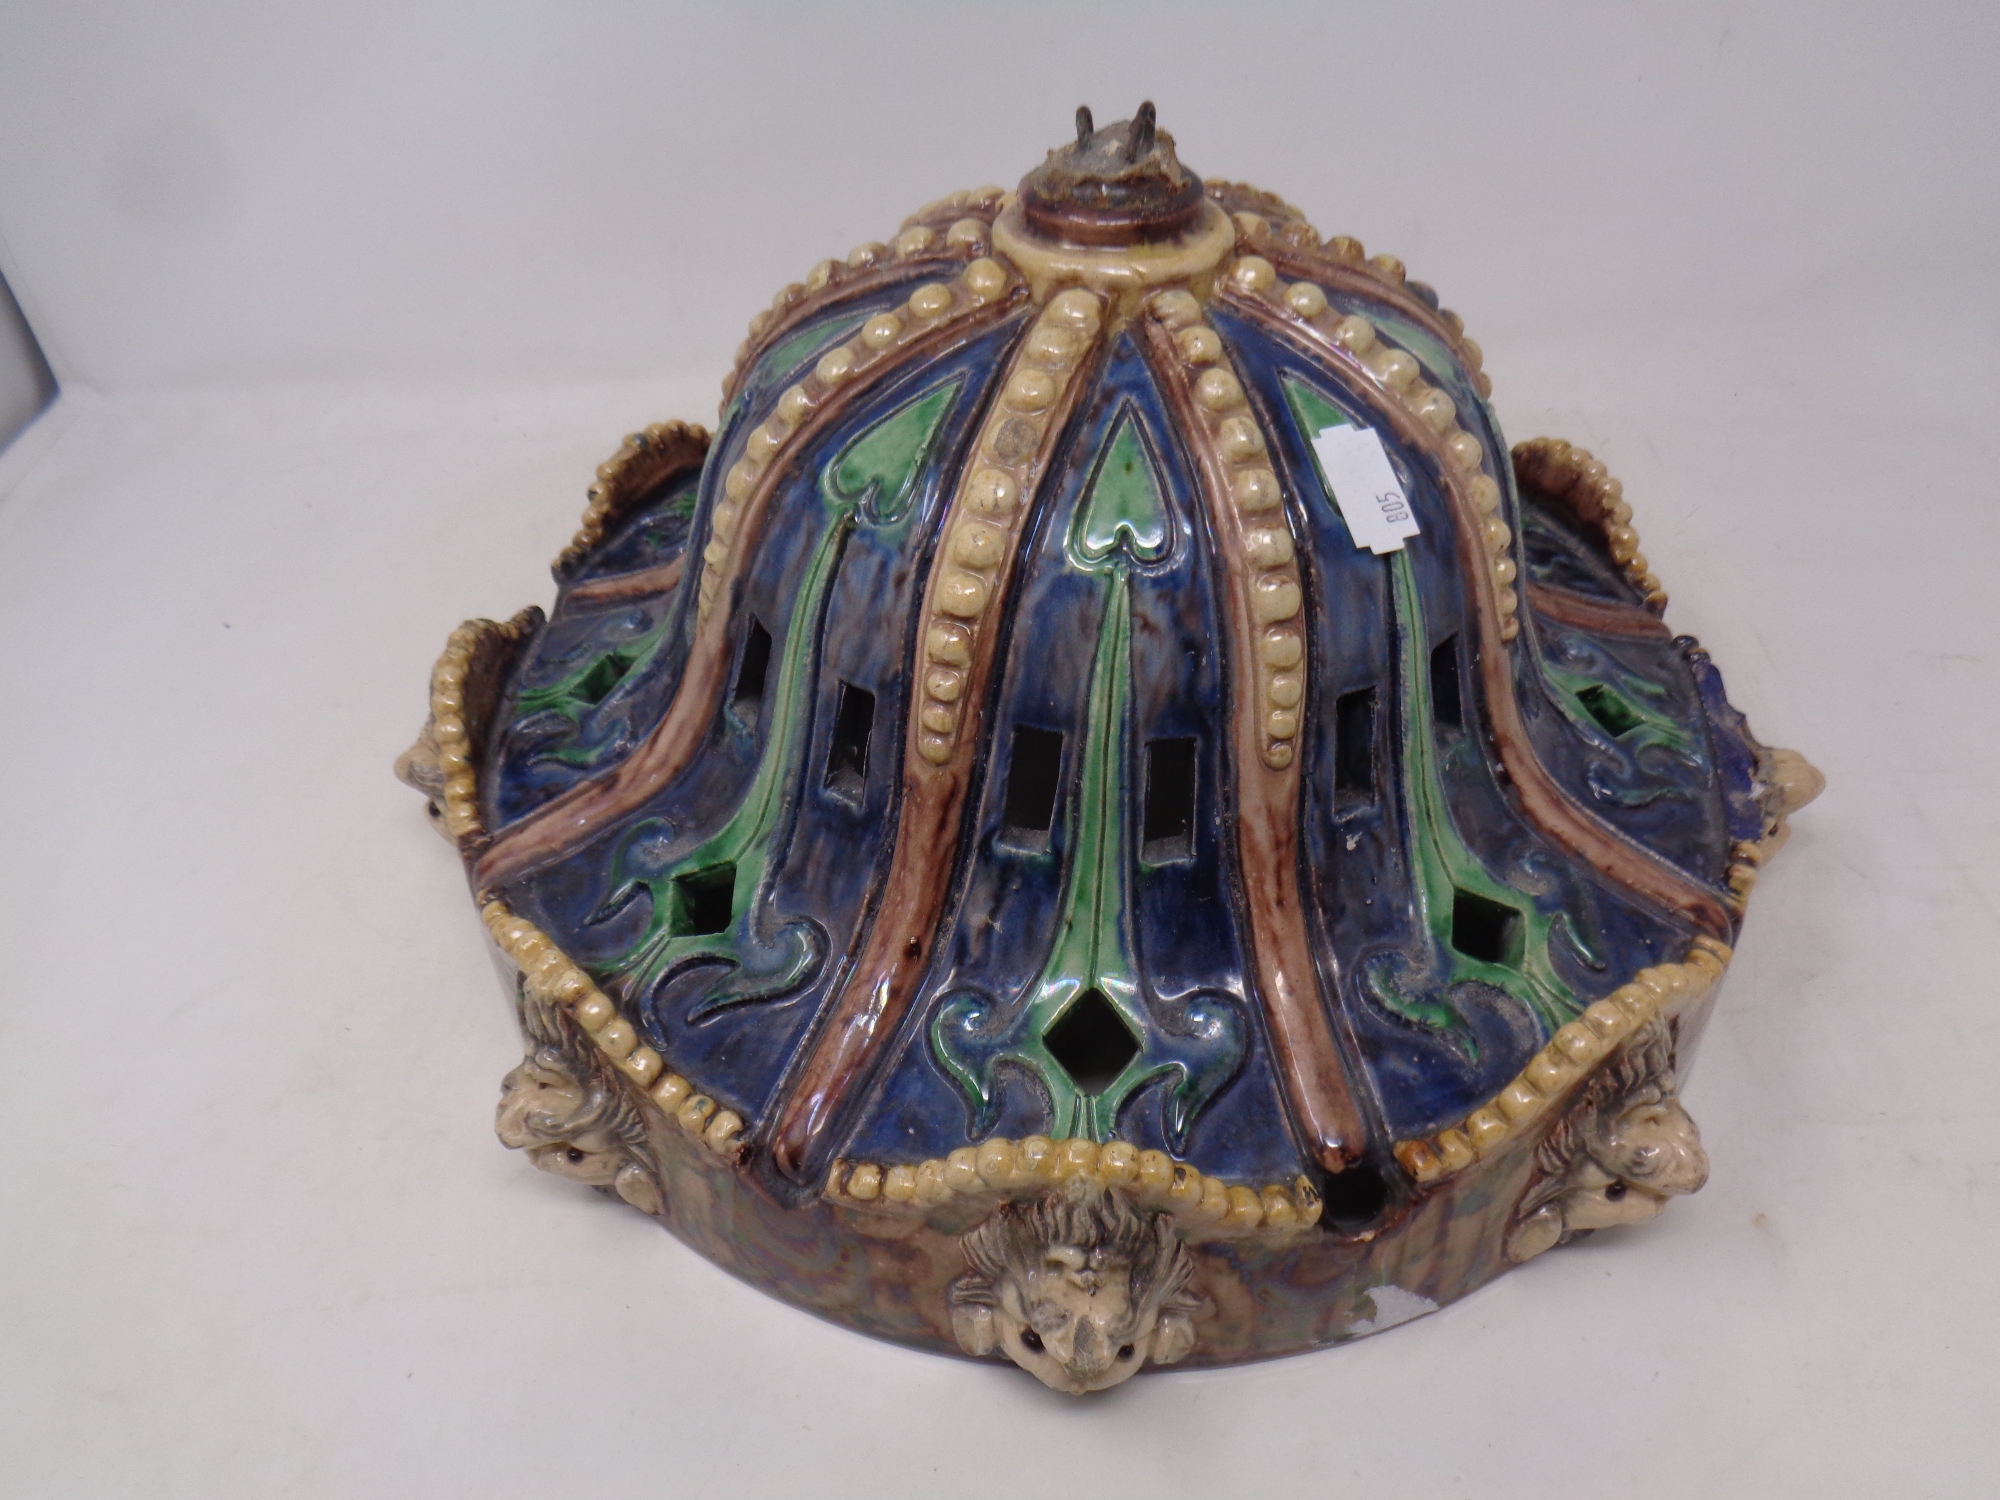 A 19th century Majolica style glazed light shade decorated with lion masks